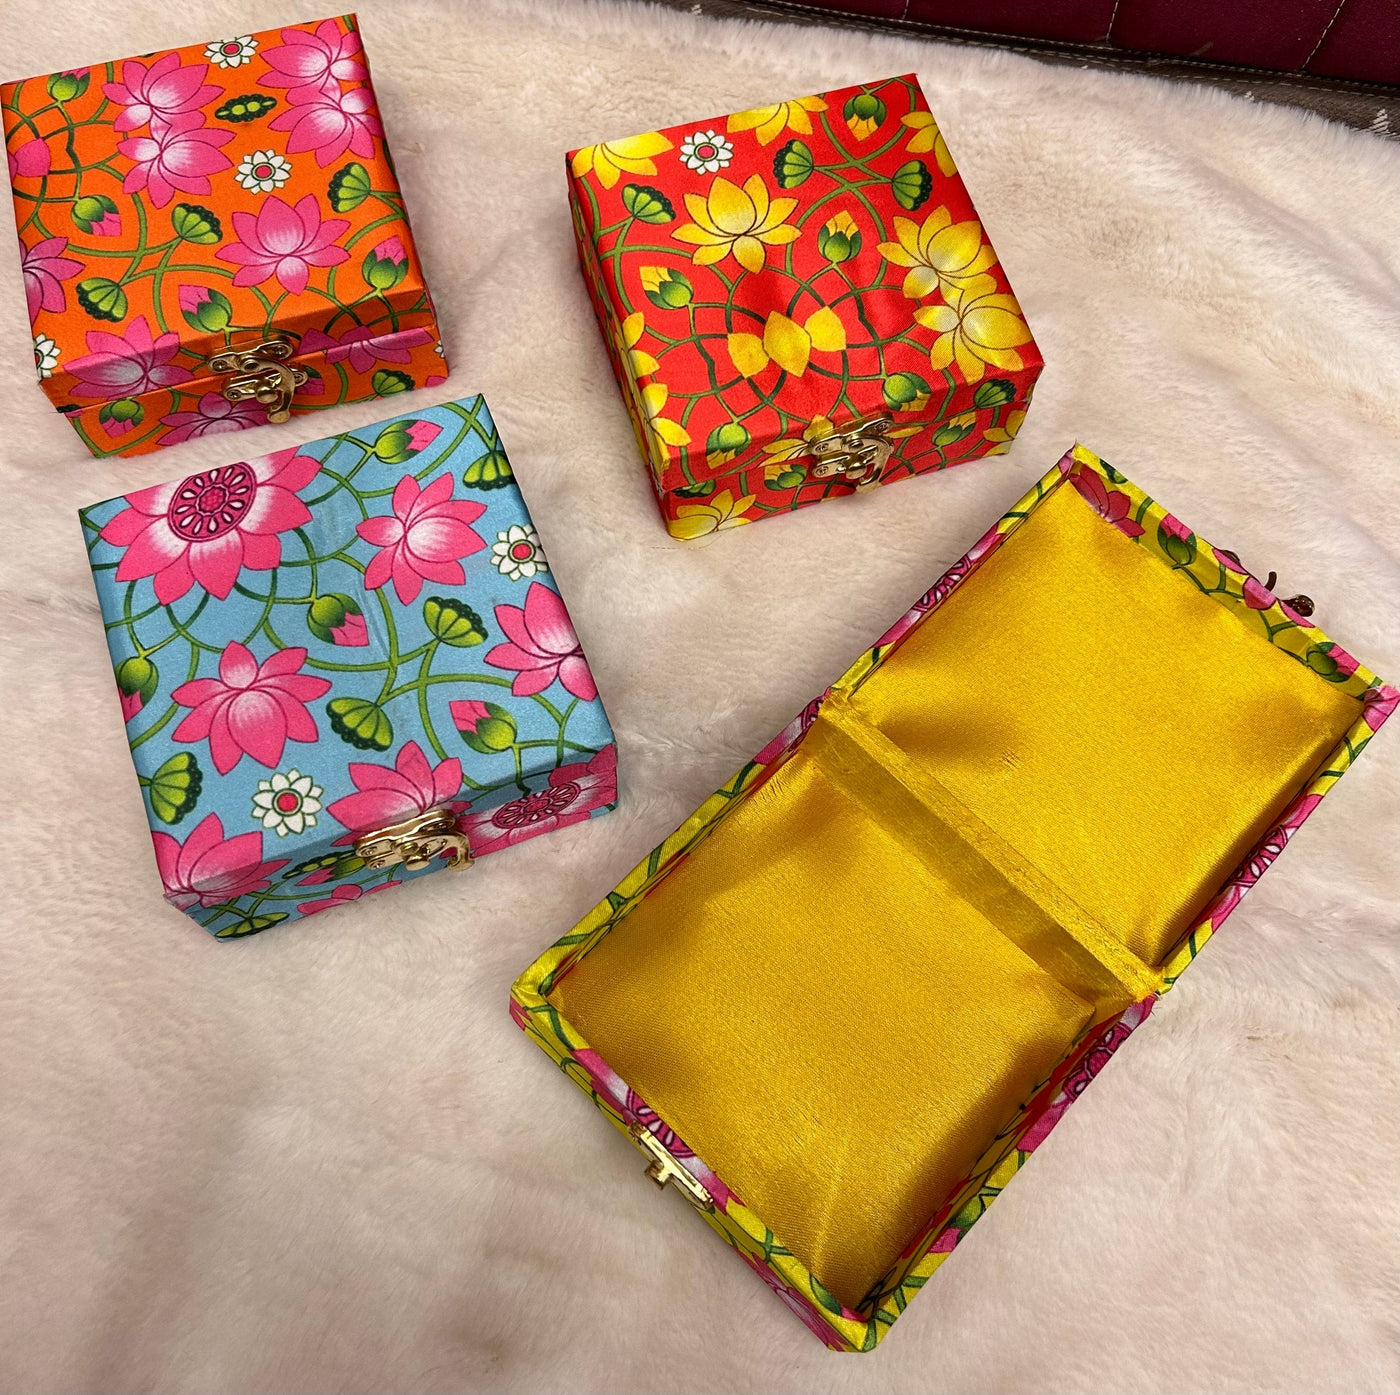 80 Rs each on buying 🏷in bulk | Call 📞 at 8619550223 Cash box LAMANSH 5*5 inch Floral print Cash Gaddi box for wedding return gifts 🎁 and favours | Gift boxes for making gift hampers for bridesmaids giveaways